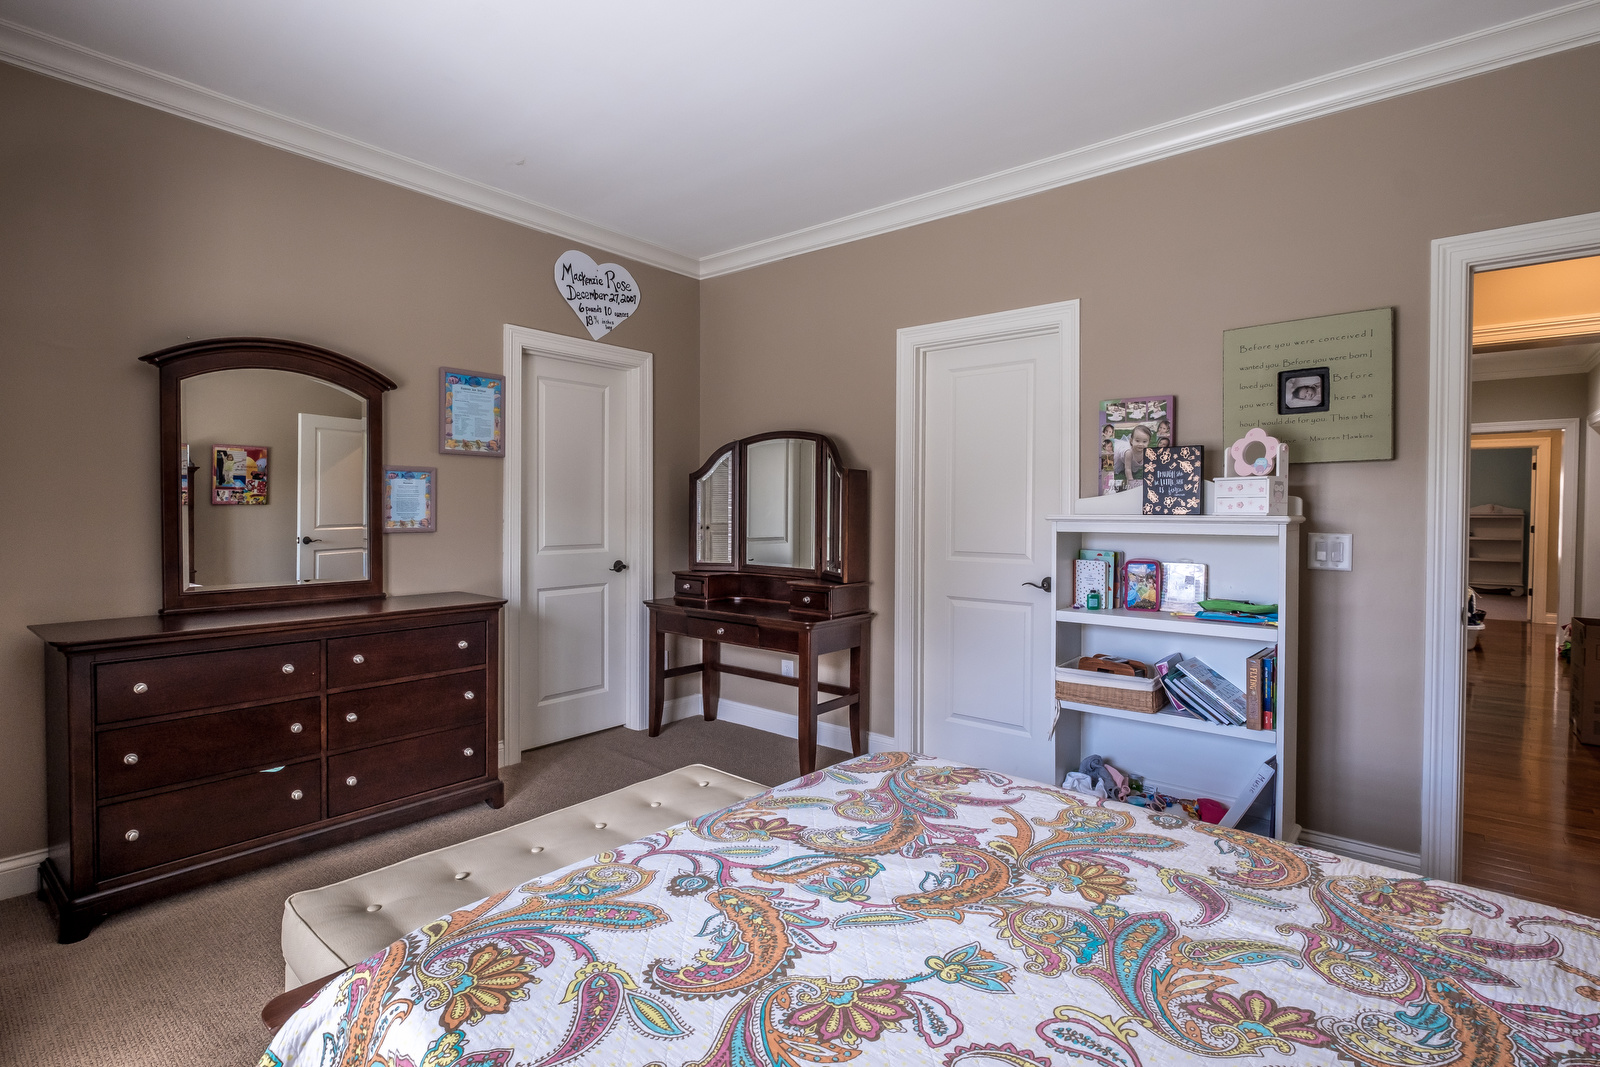 Bedroom with brown walls white trim light brown carpets